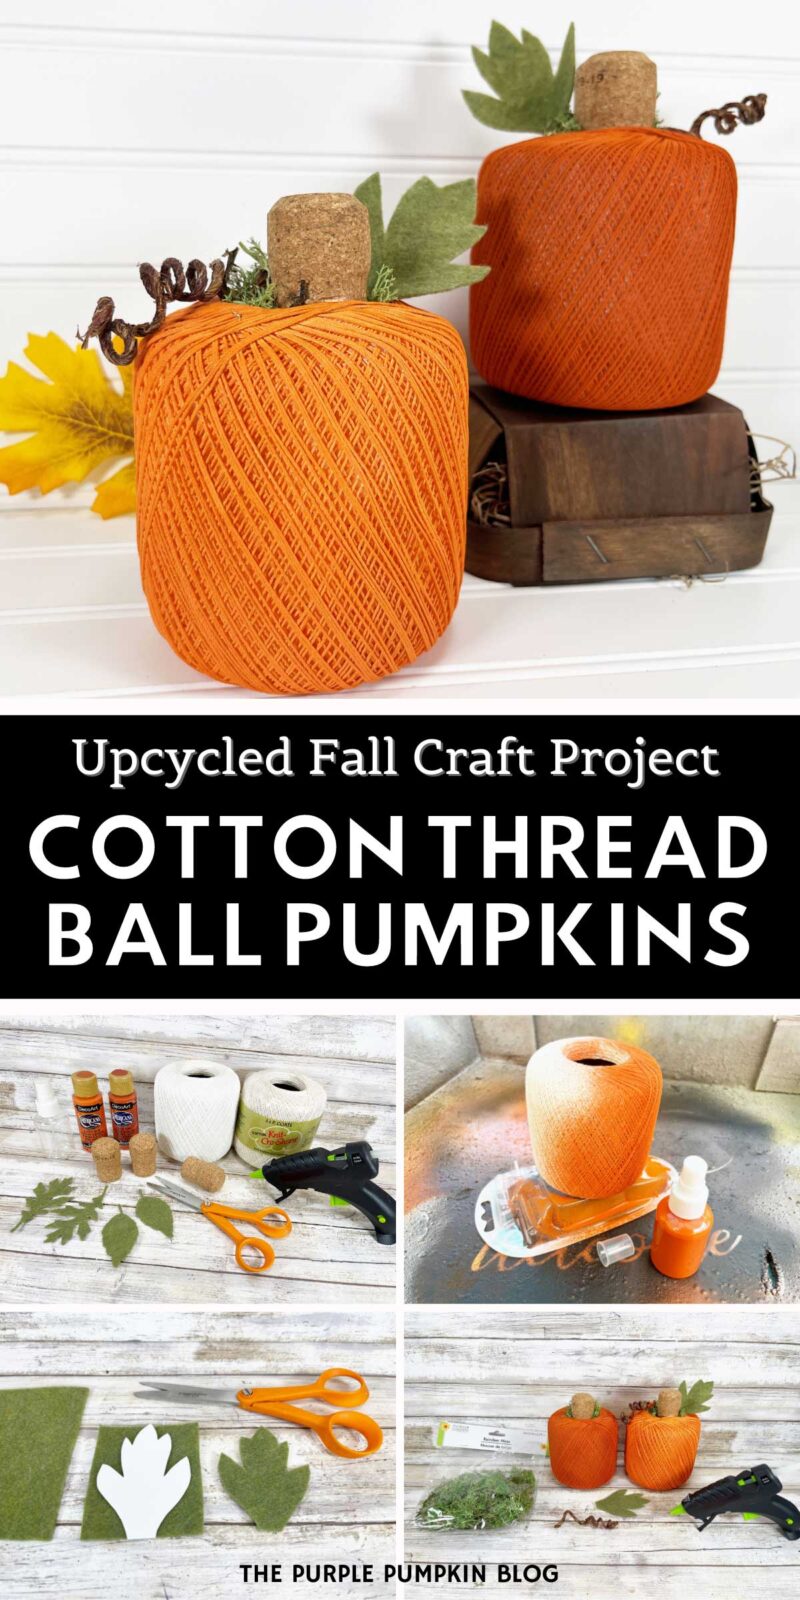 Upcycled Fall Craft Project - Cotton Thread Ball Pumpkins